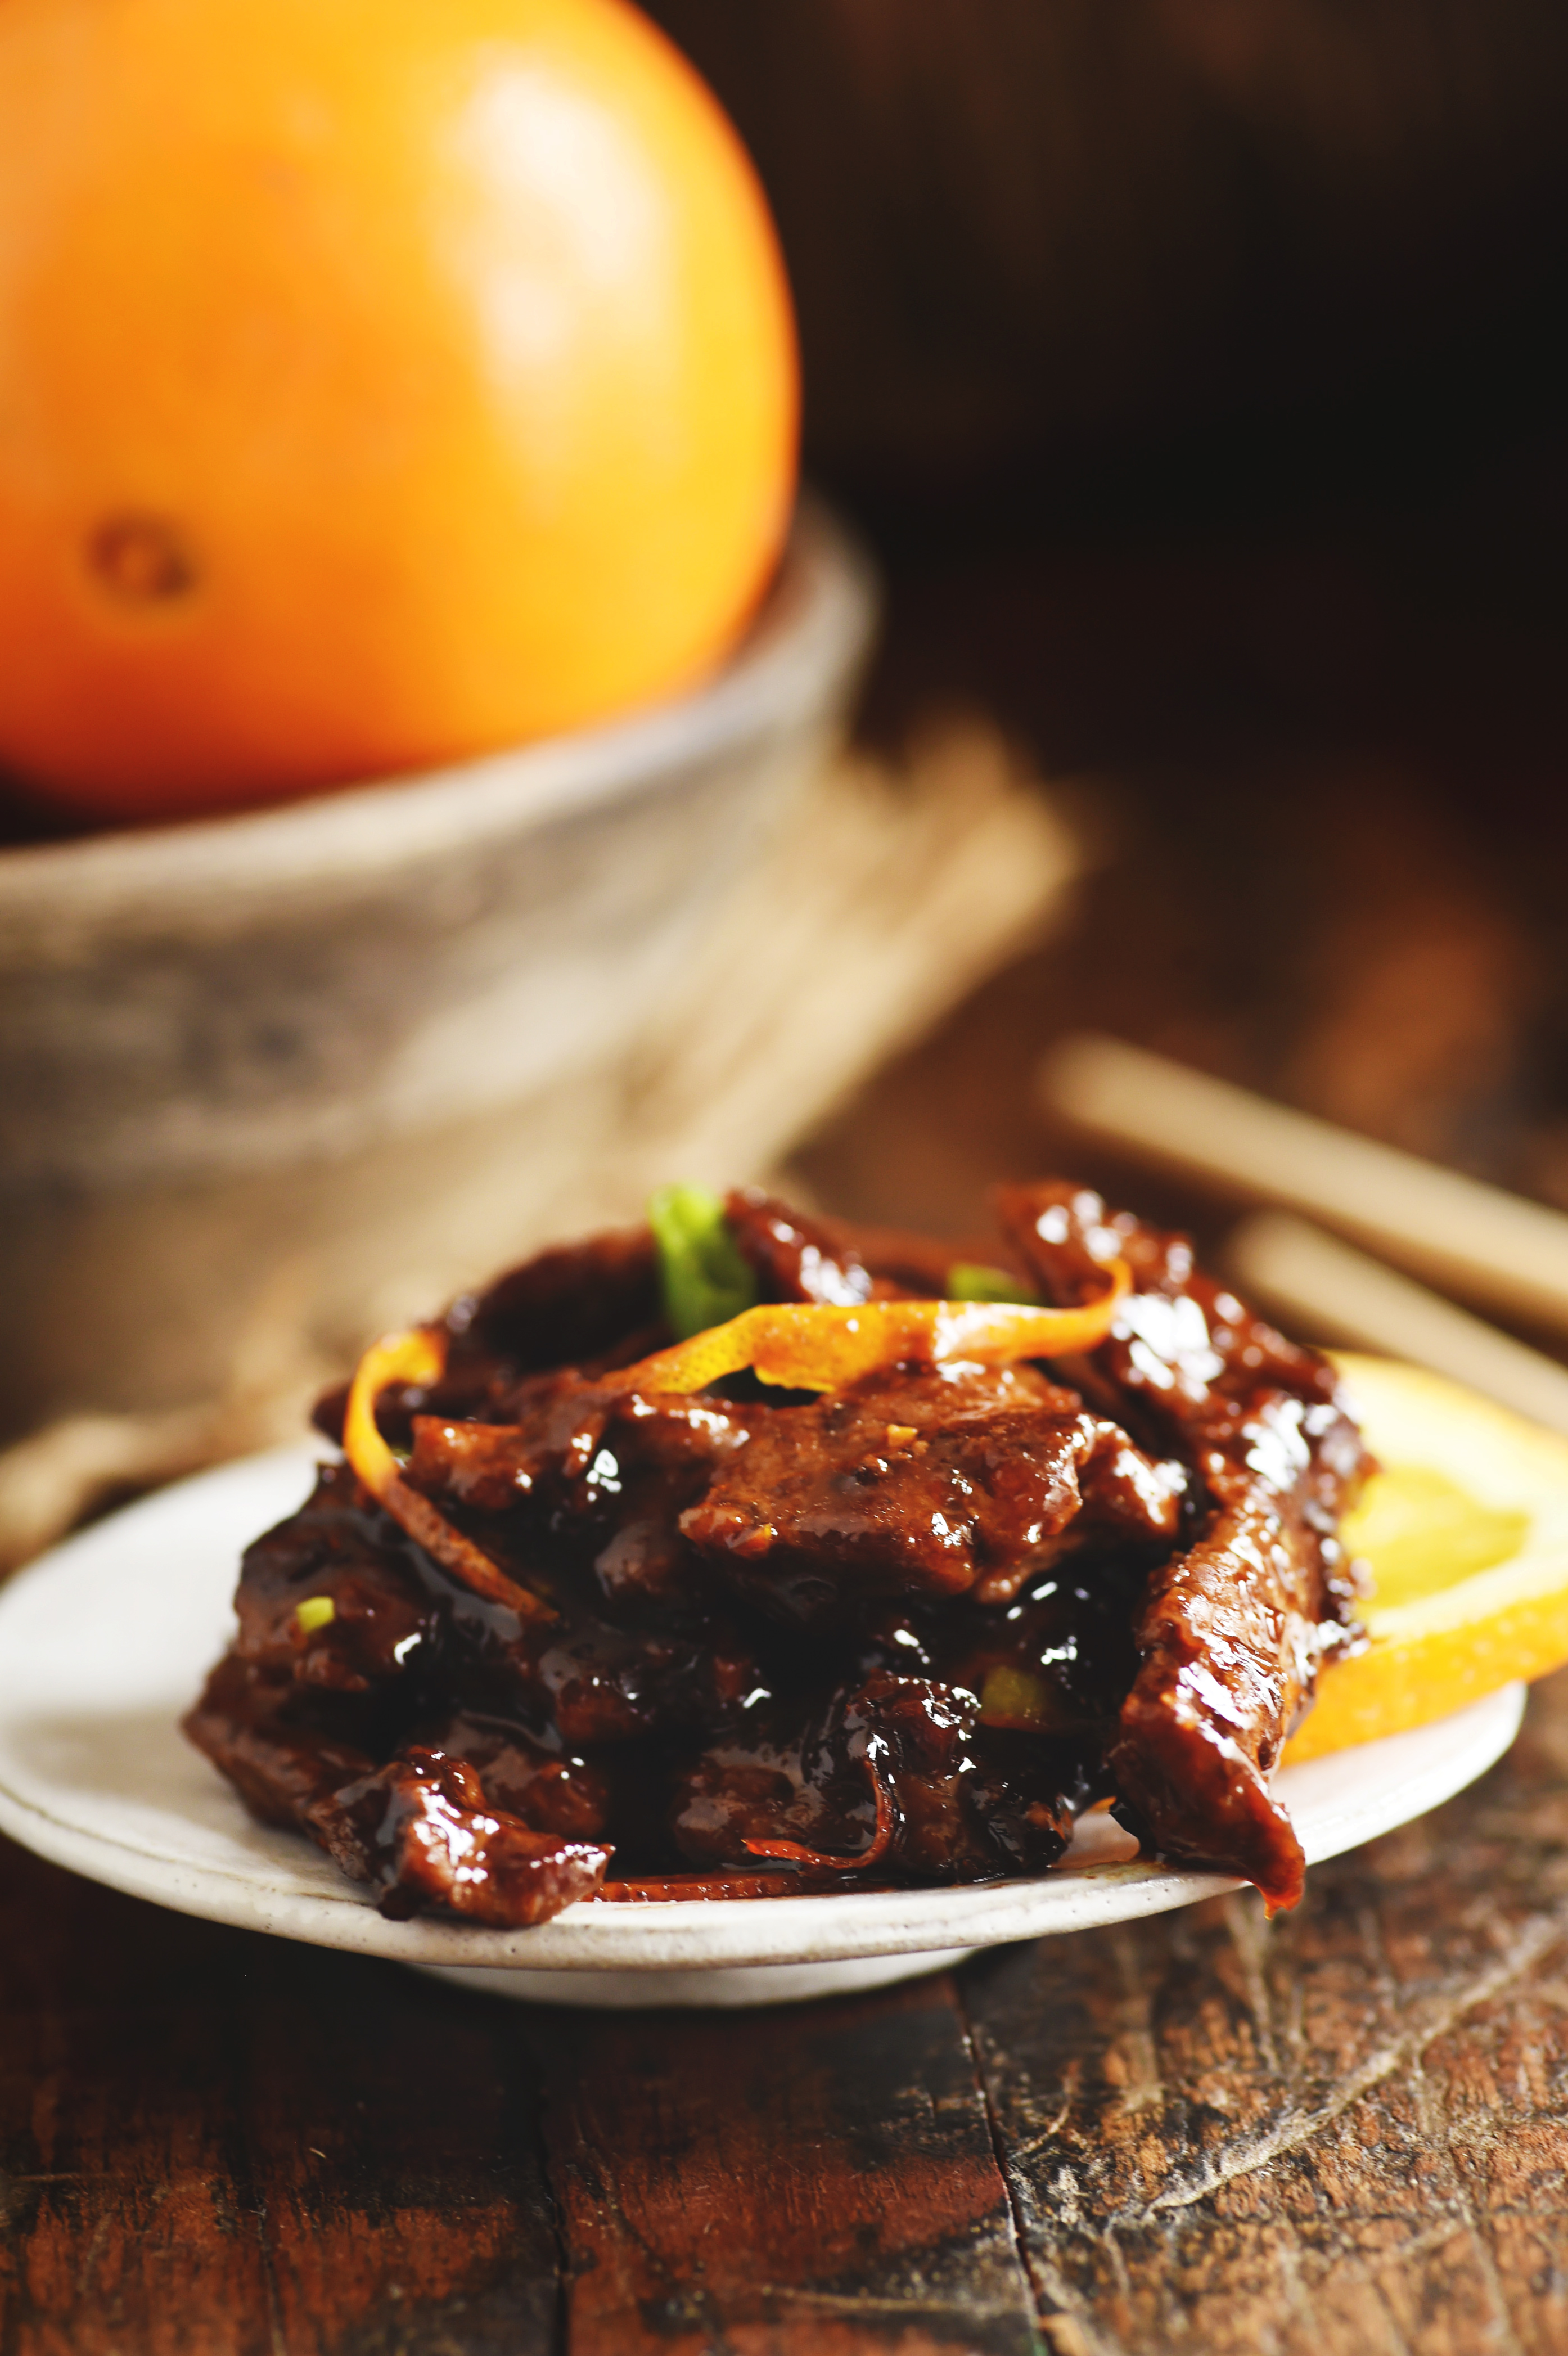 Orange Beef - Low-Carb Chinese Food Recipe served on a plate with oranges in a bowl.